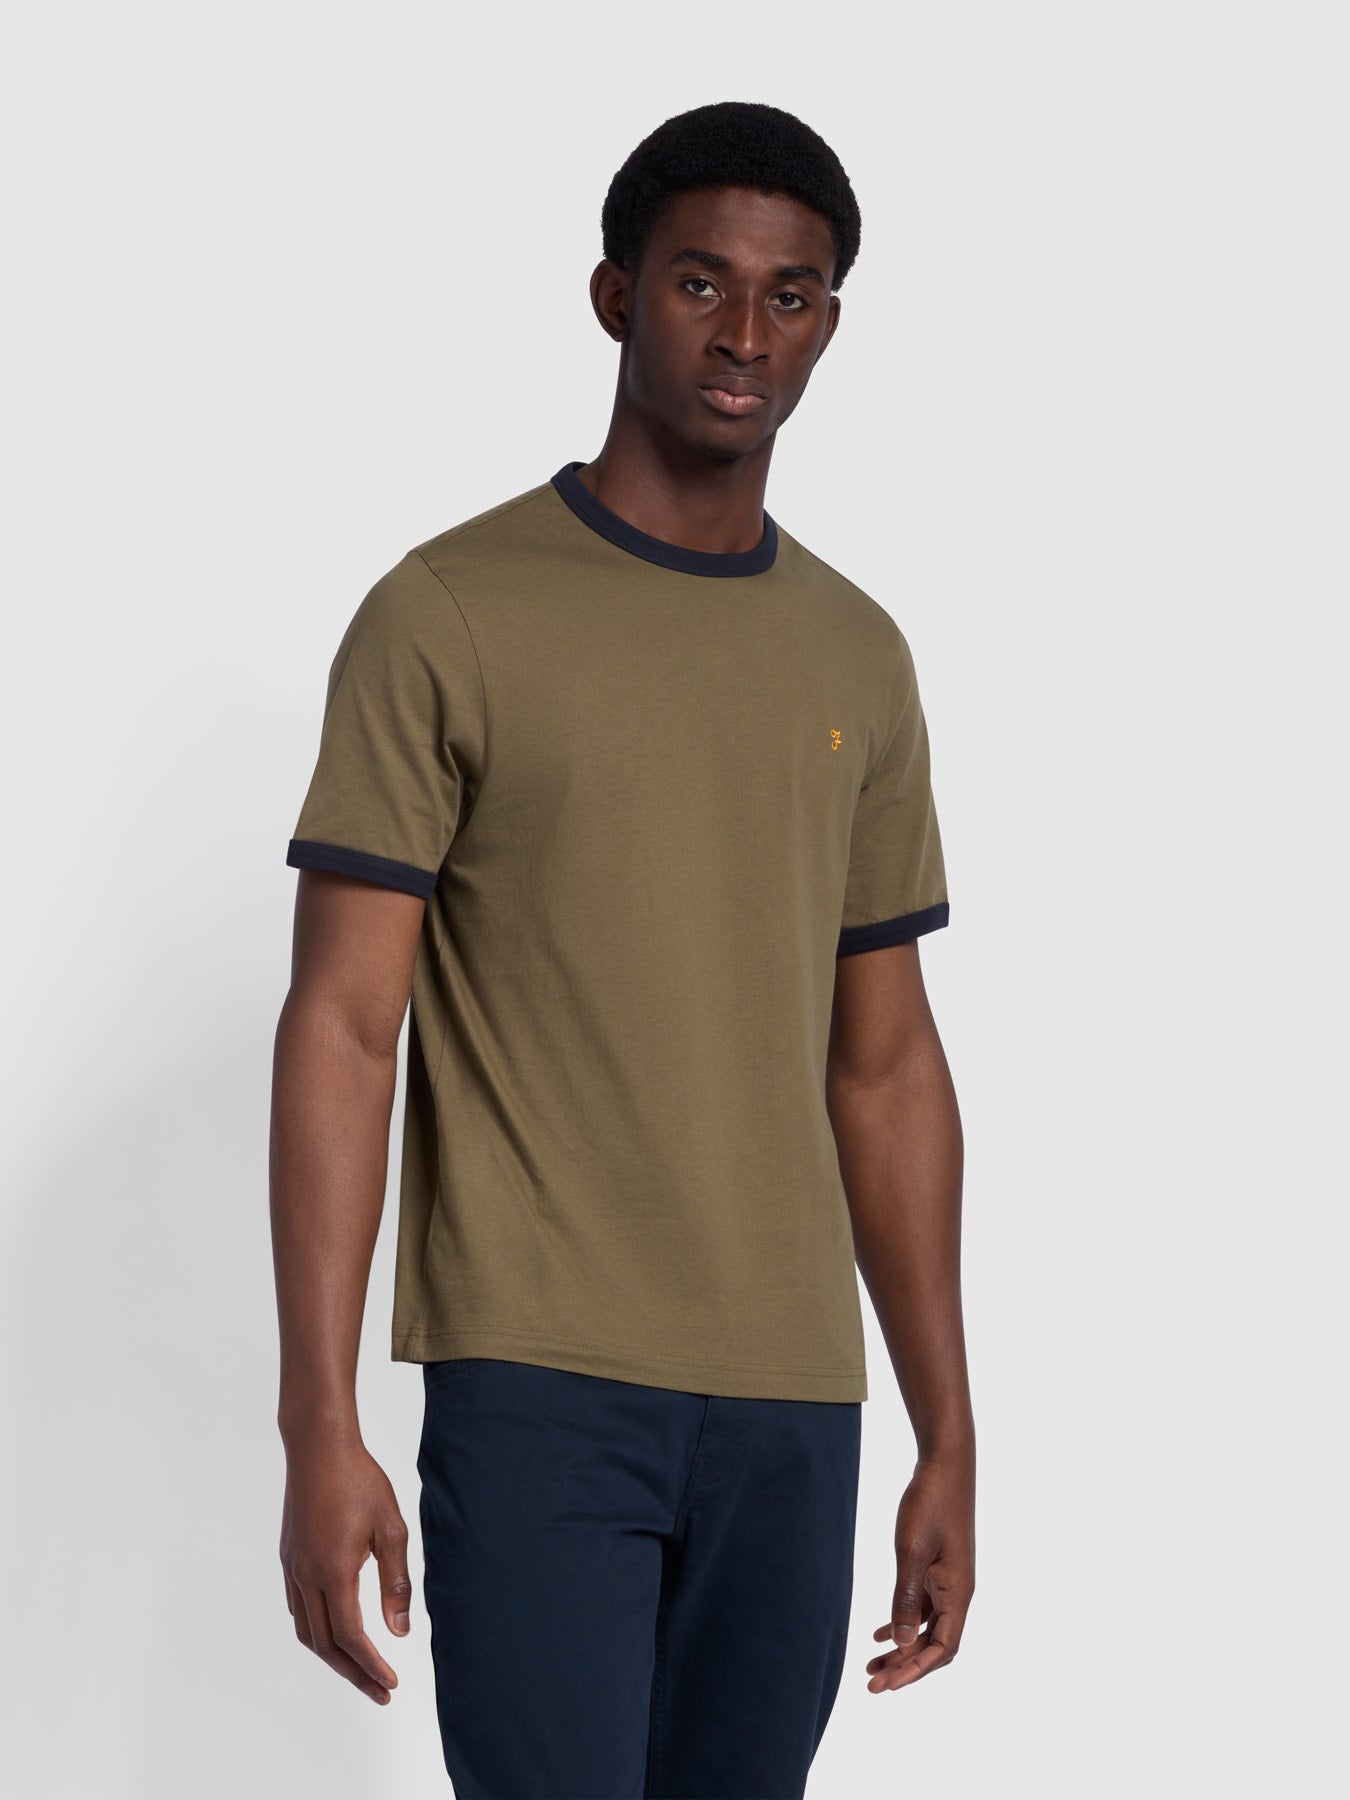 View Groves Regular Fit TShirt In Olive Green information